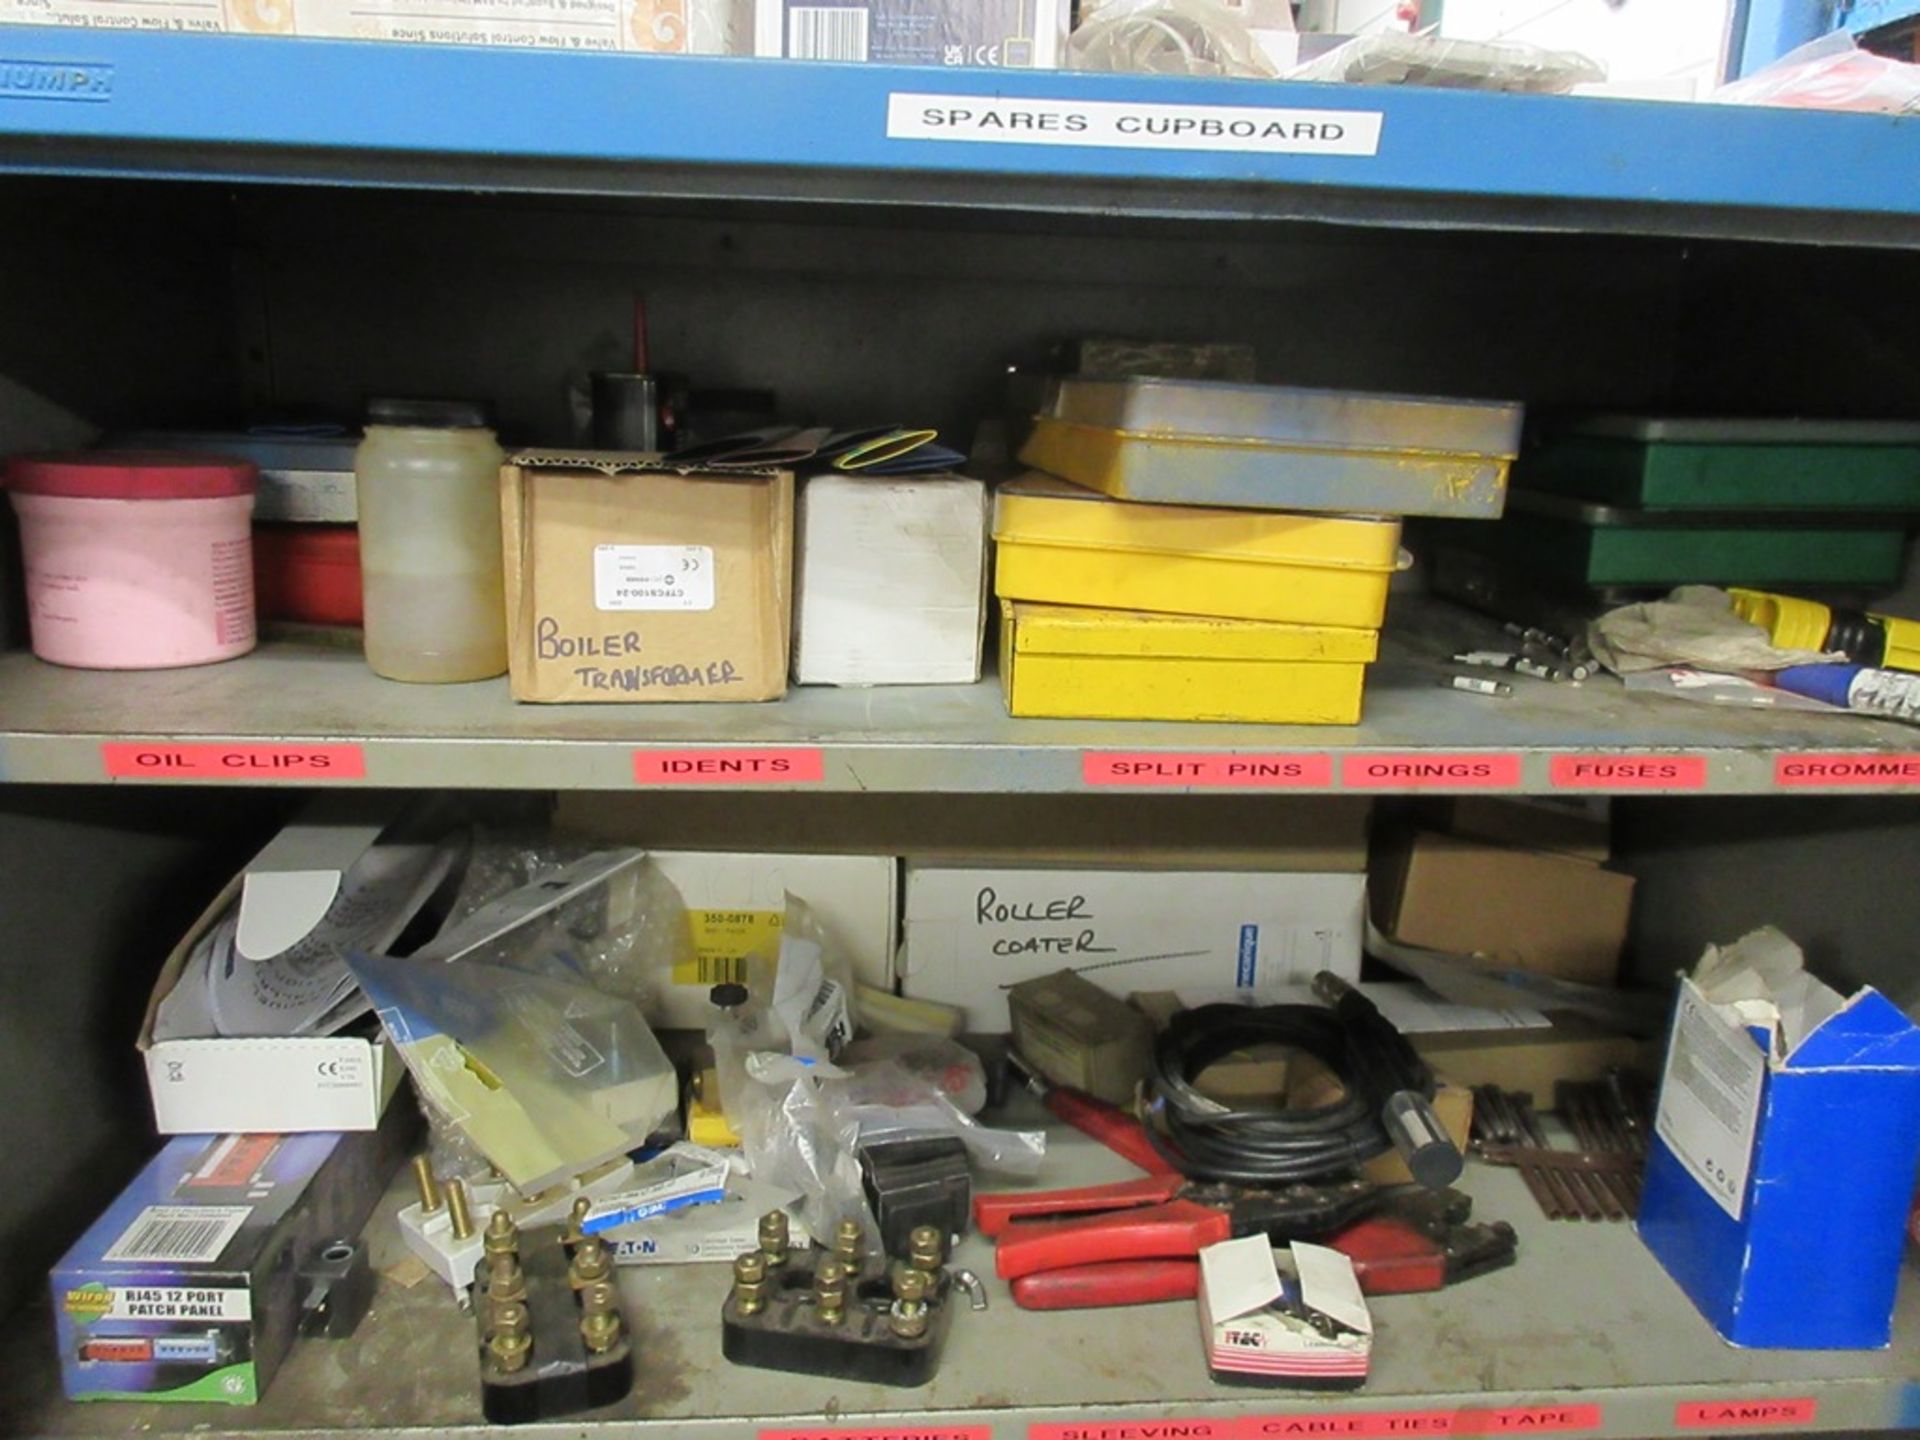 Metal cupboard and contents including screws, relays, cable clips, patch panel etc. - Image 2 of 6